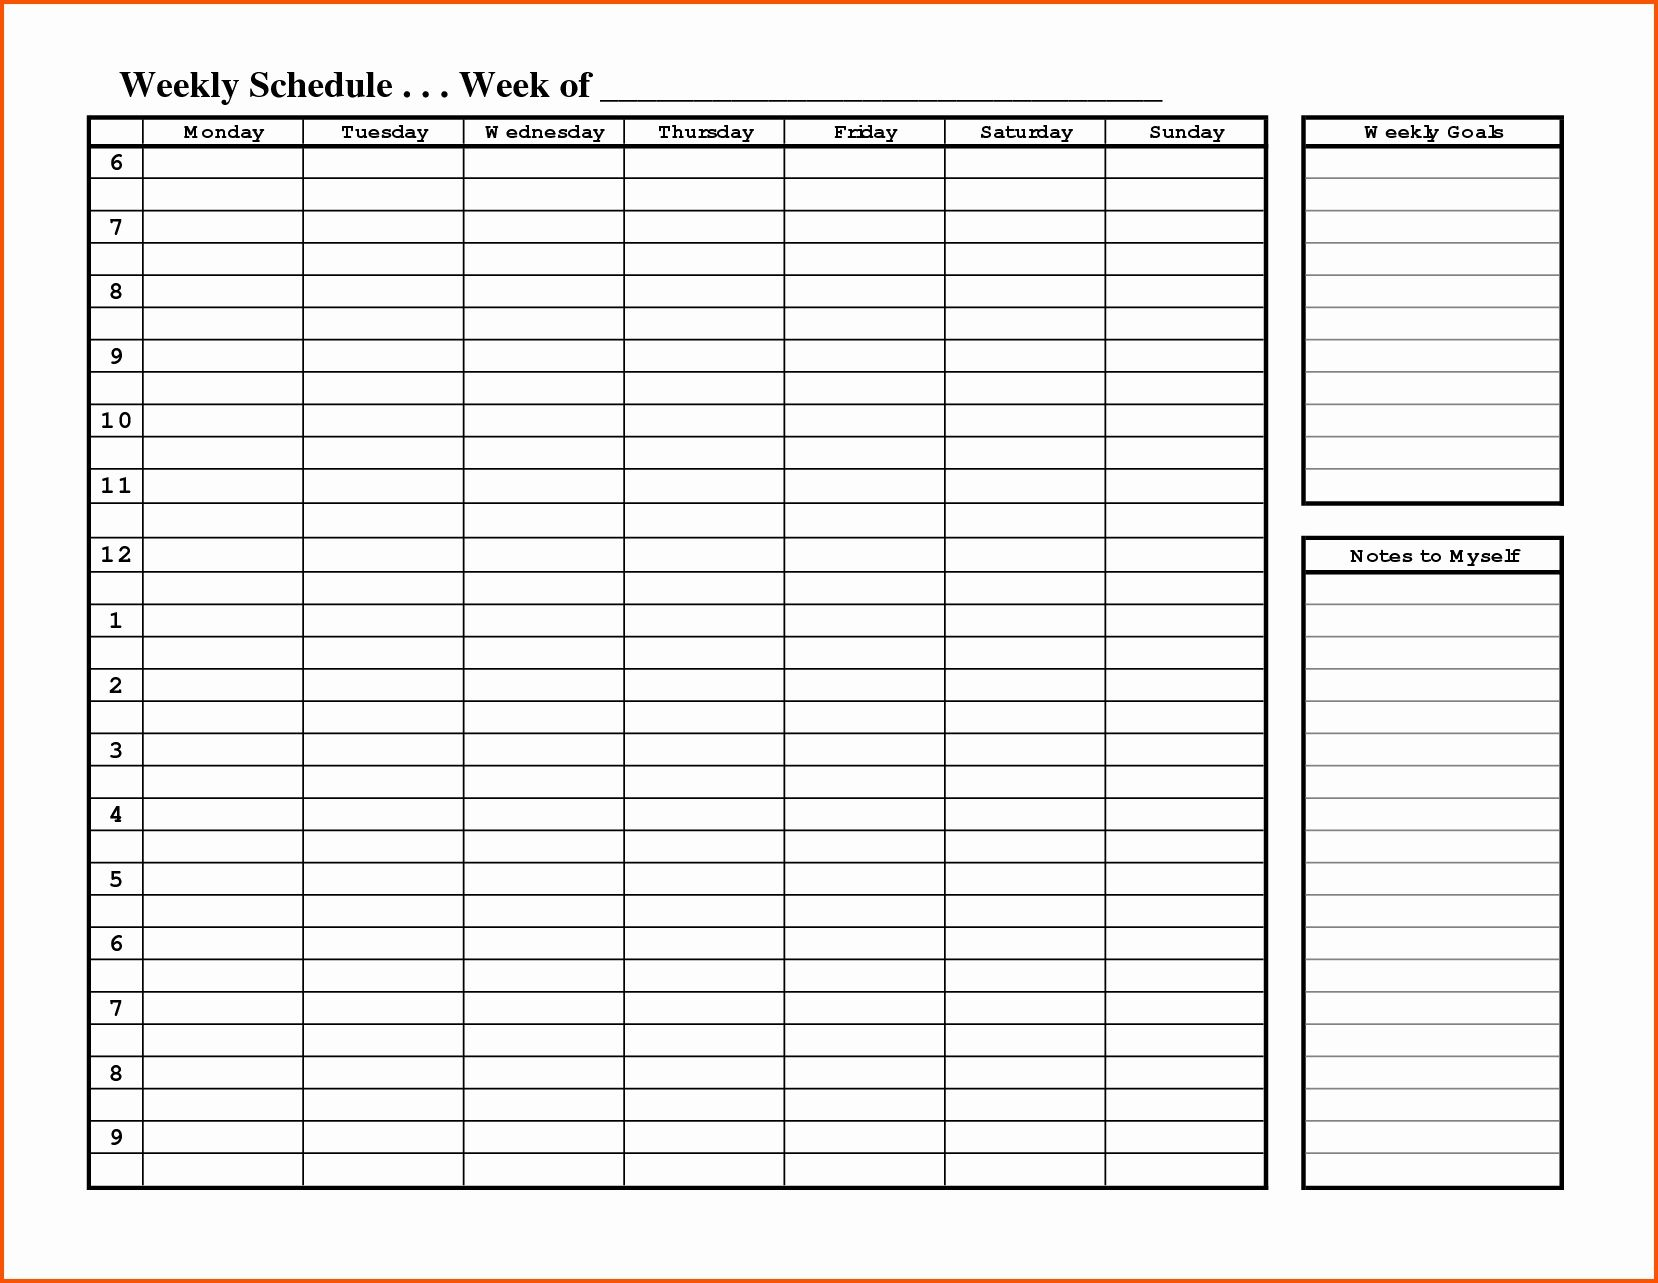 Weekly Hourly Planner Template Word | Daily Calendar throughout Free Printable Hourly Planner